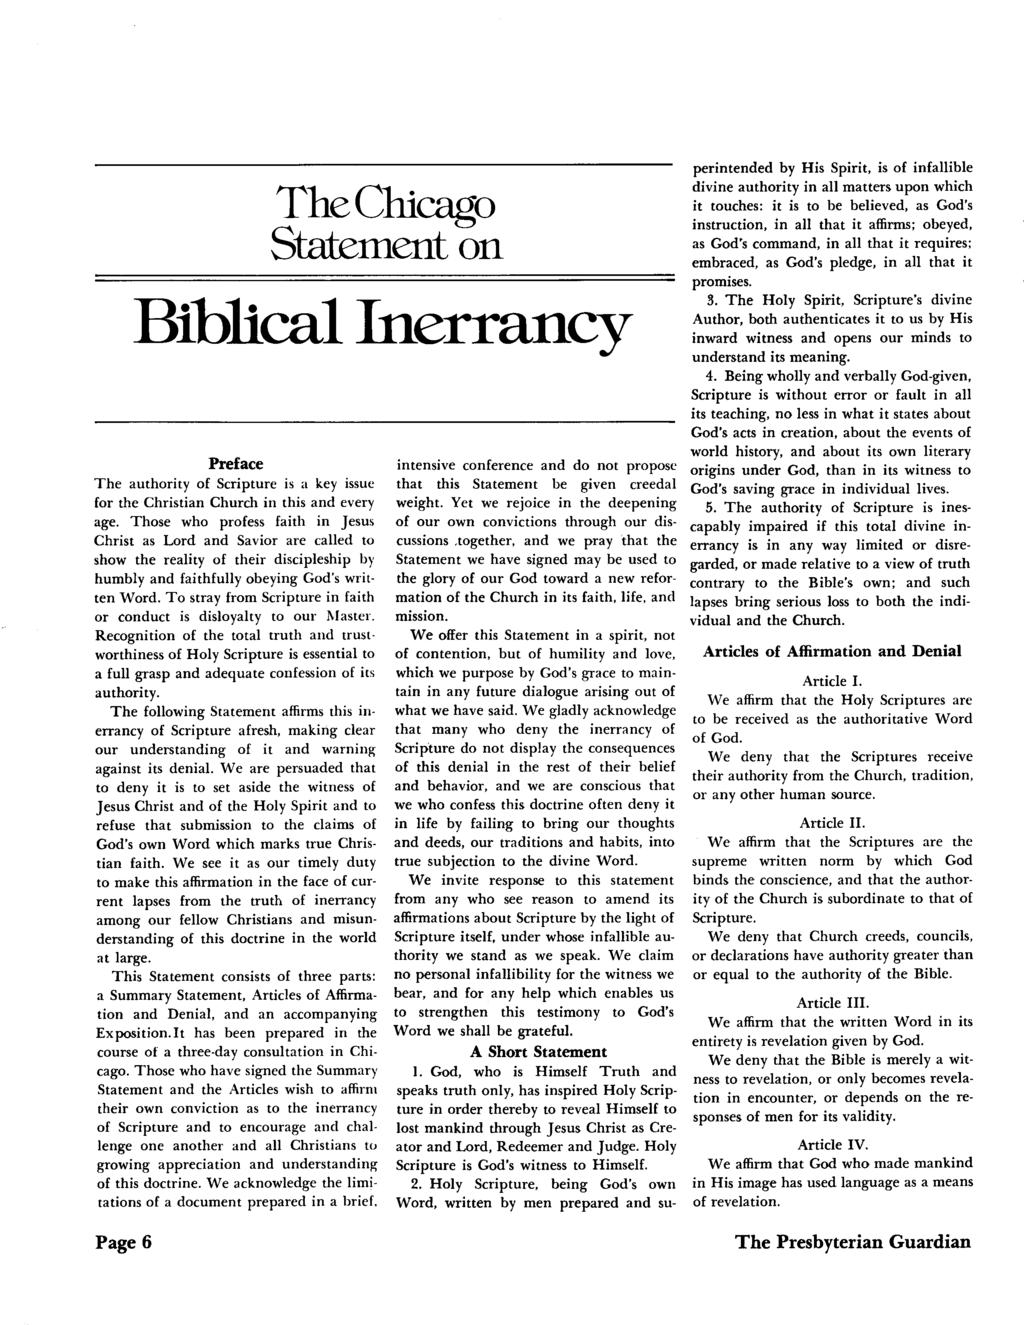 TheChicago Statement on Biblical Inerrancy Preface The authority of Scripture is a key issue for the Christian Church in this and every age.